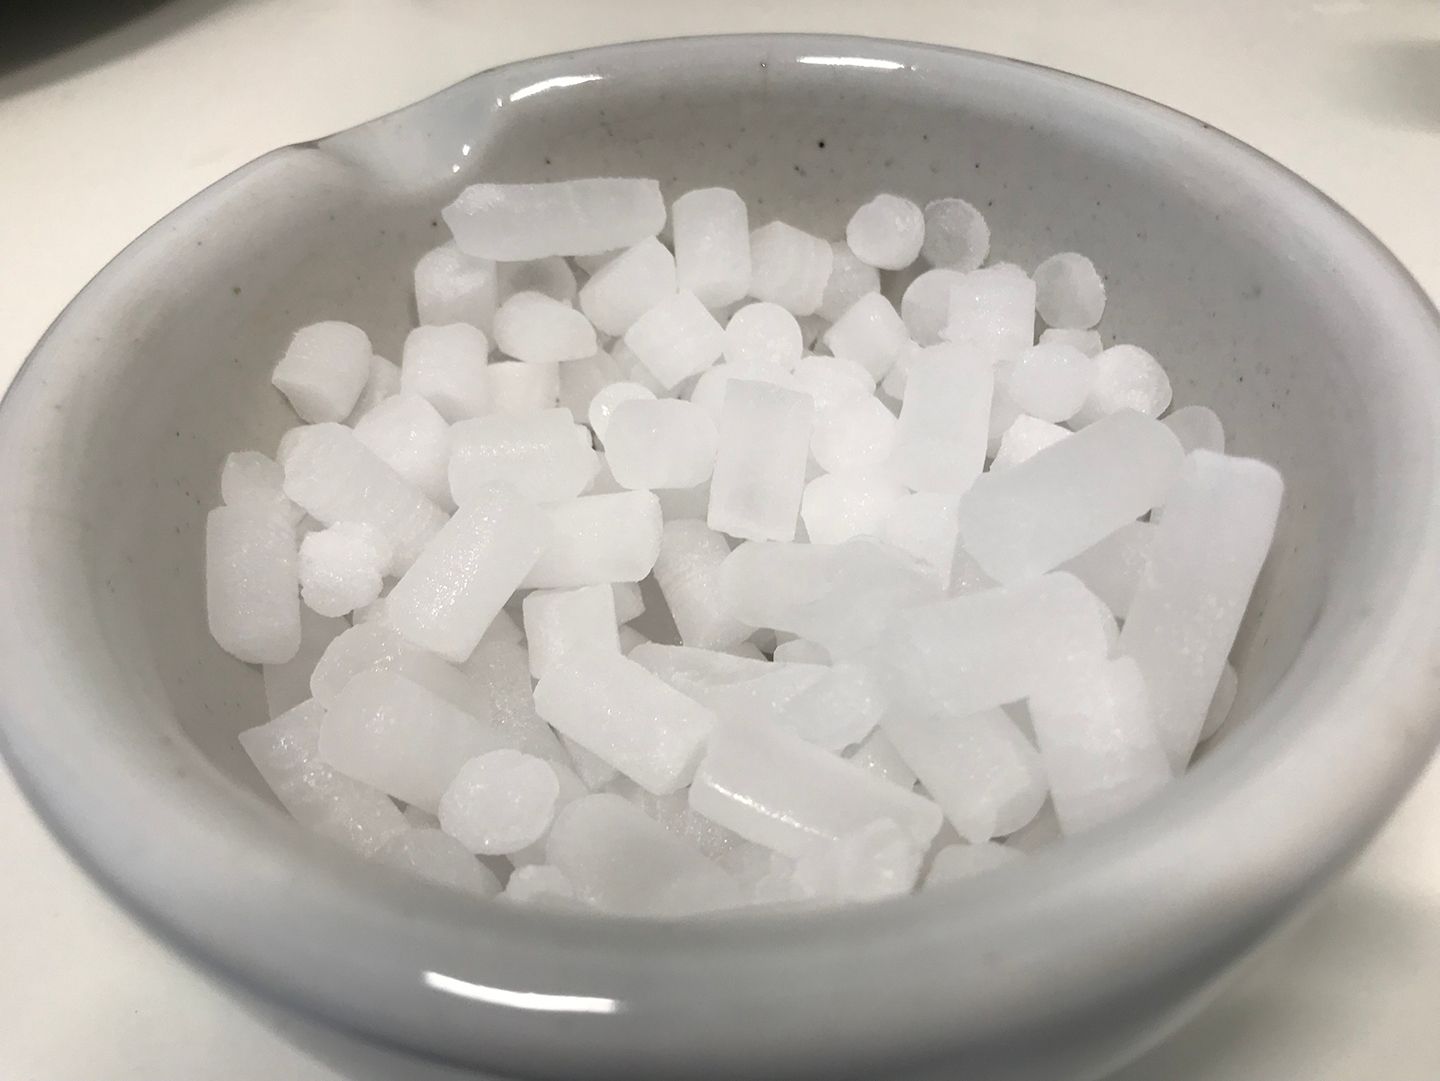 Dry Ice Pellets in bowl